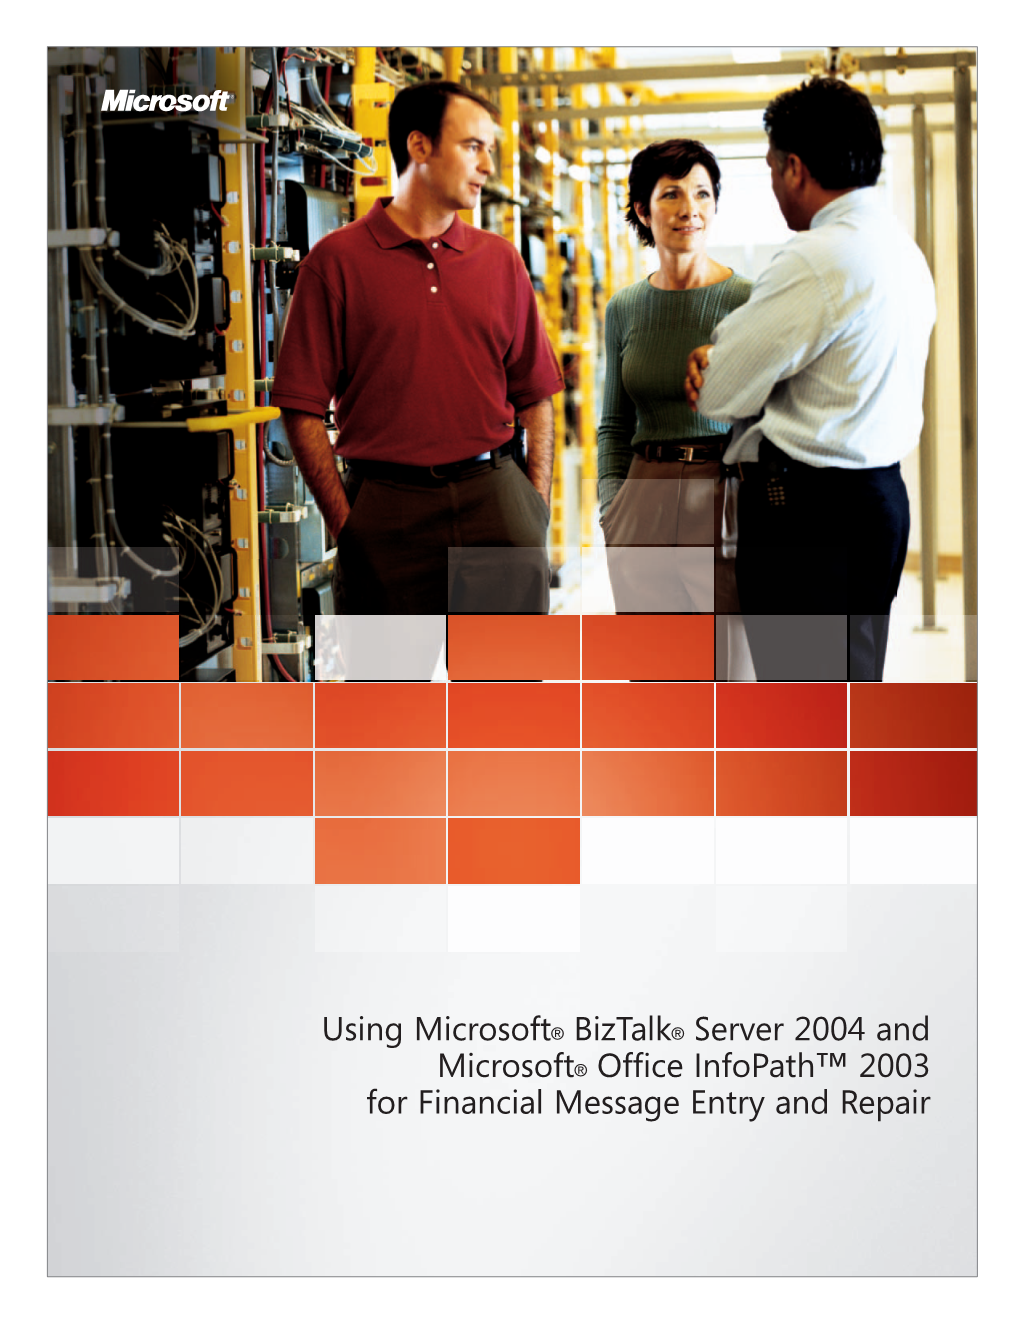 Using Microsoft® Biztalk® Server 2004 and Microsoft® Office Infopath™ 2003 for Financial Message Entry and Repair